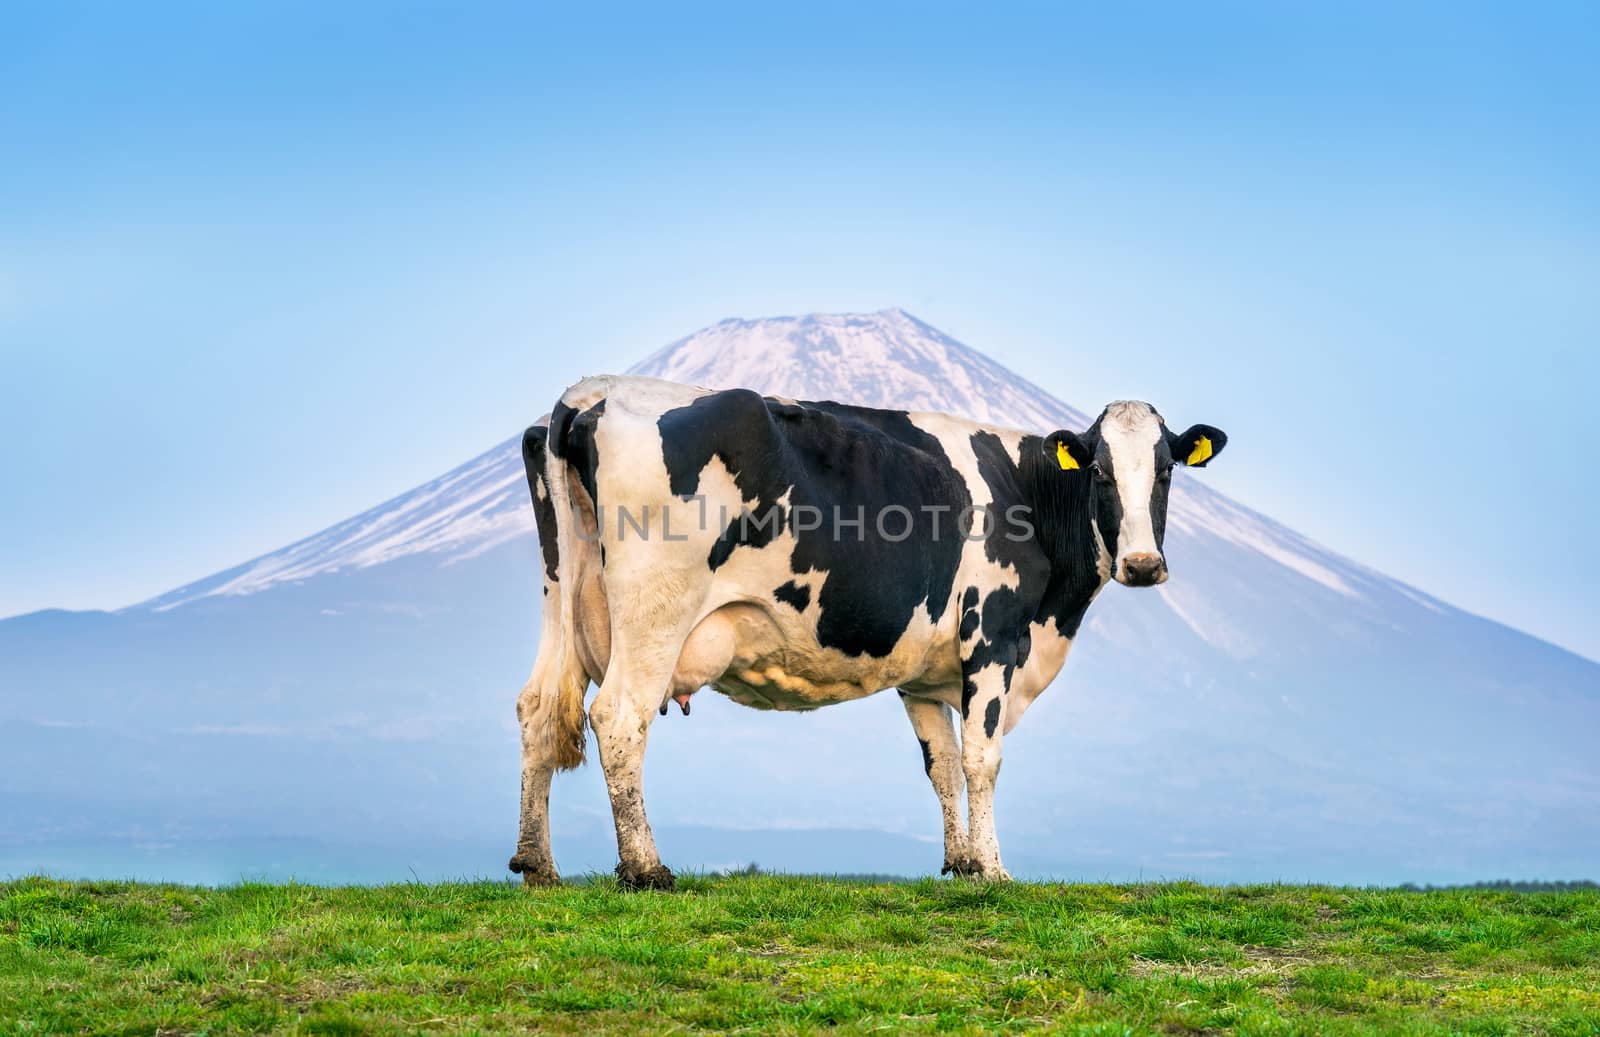 Cows standing on the green field in front of Fuji mountain, Japan. by gutarphotoghaphy